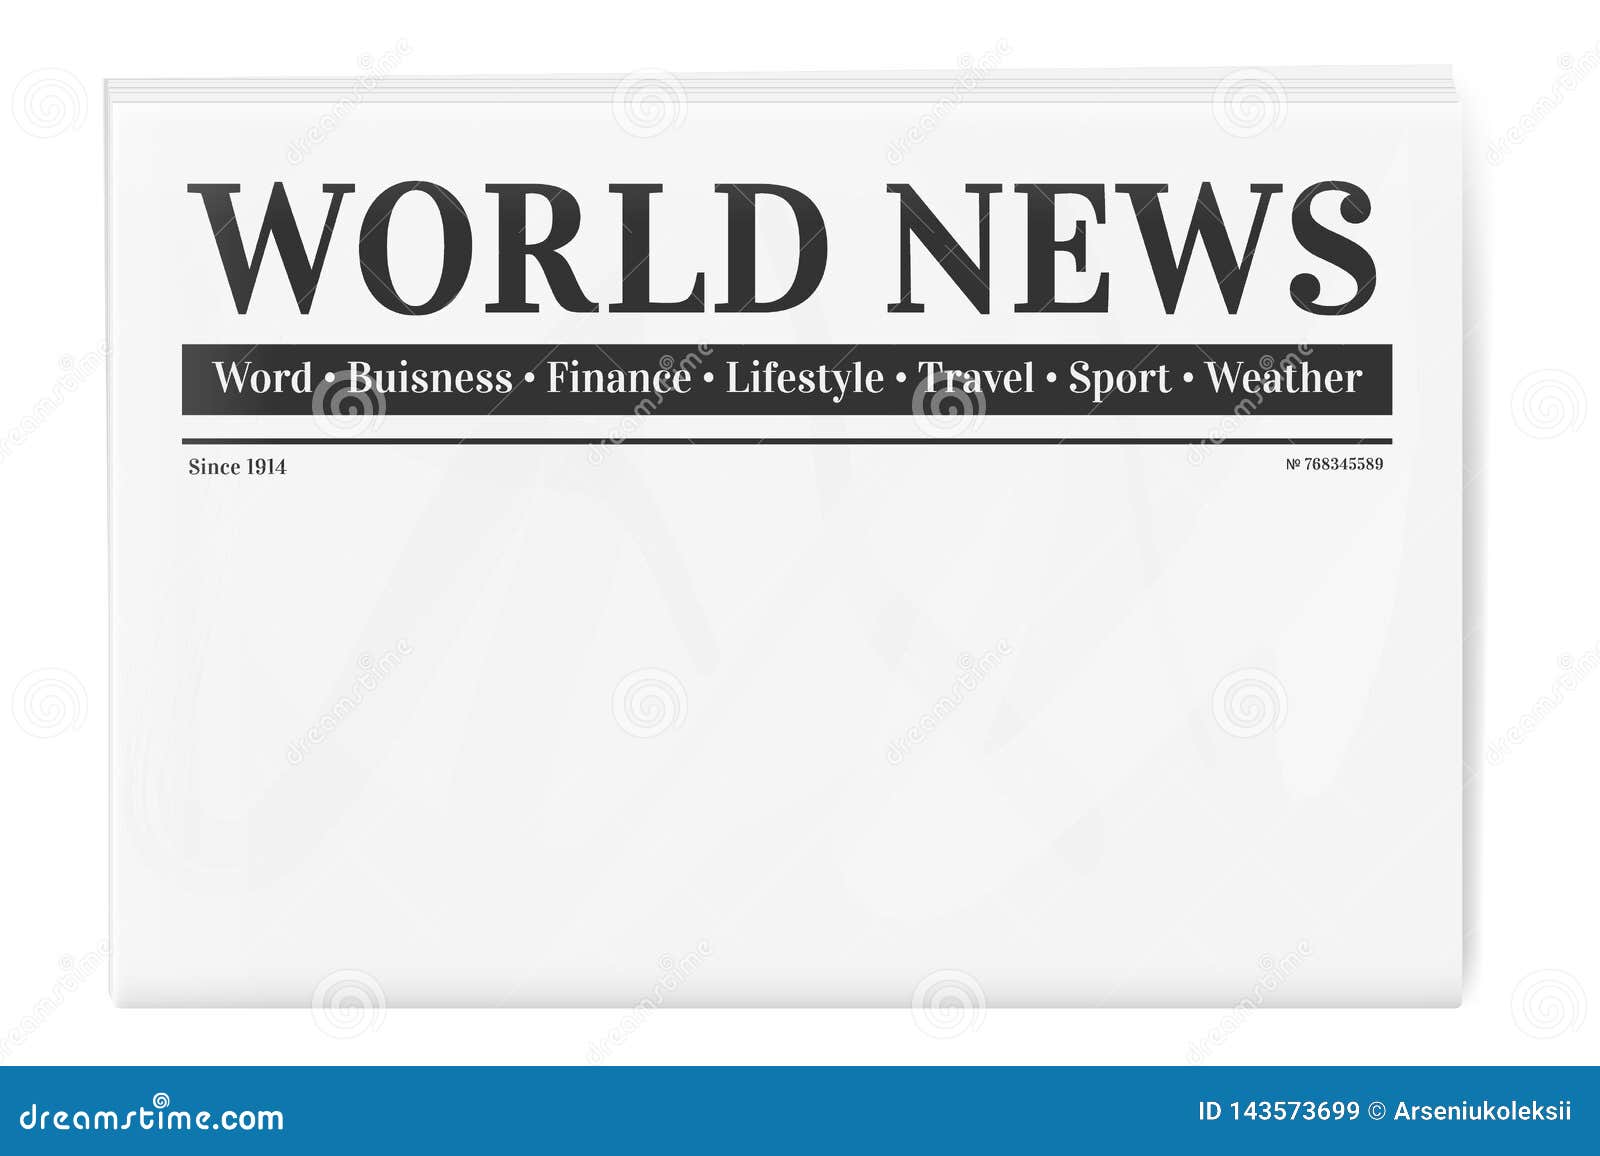 Blank Newspaper Template White Background Stock Illustrations In Blank Newspaper Template For Word